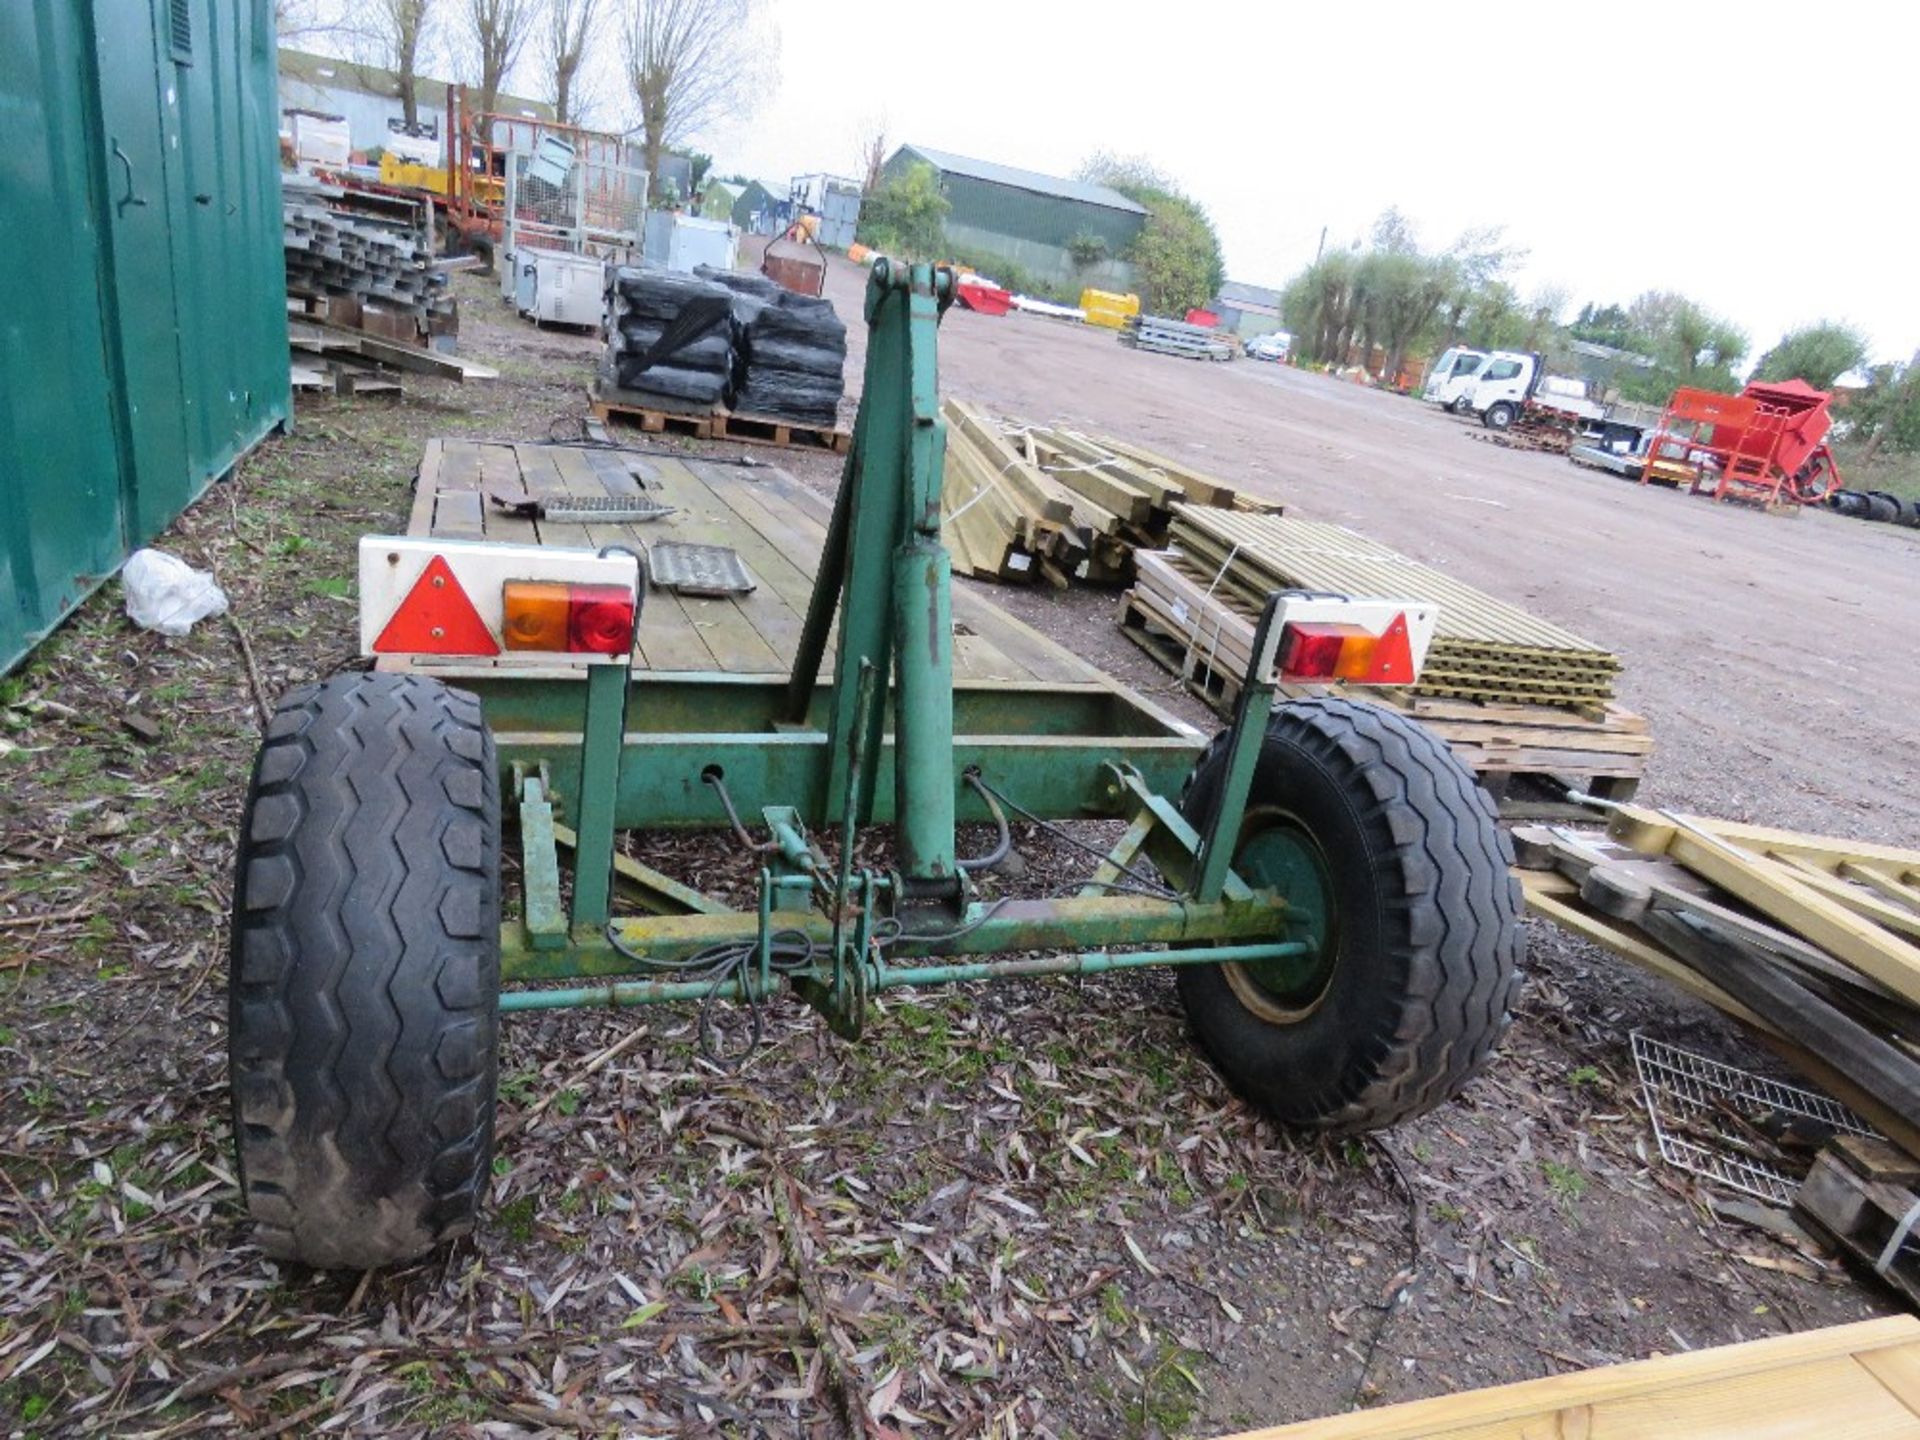 DROP BED SINGLE AXLE TRACTOR DRAWN LOW LOADER TRAILER WITH HYDRAULIC LOWERING BED PLUS 2 SHORT RAMPS - Image 6 of 7